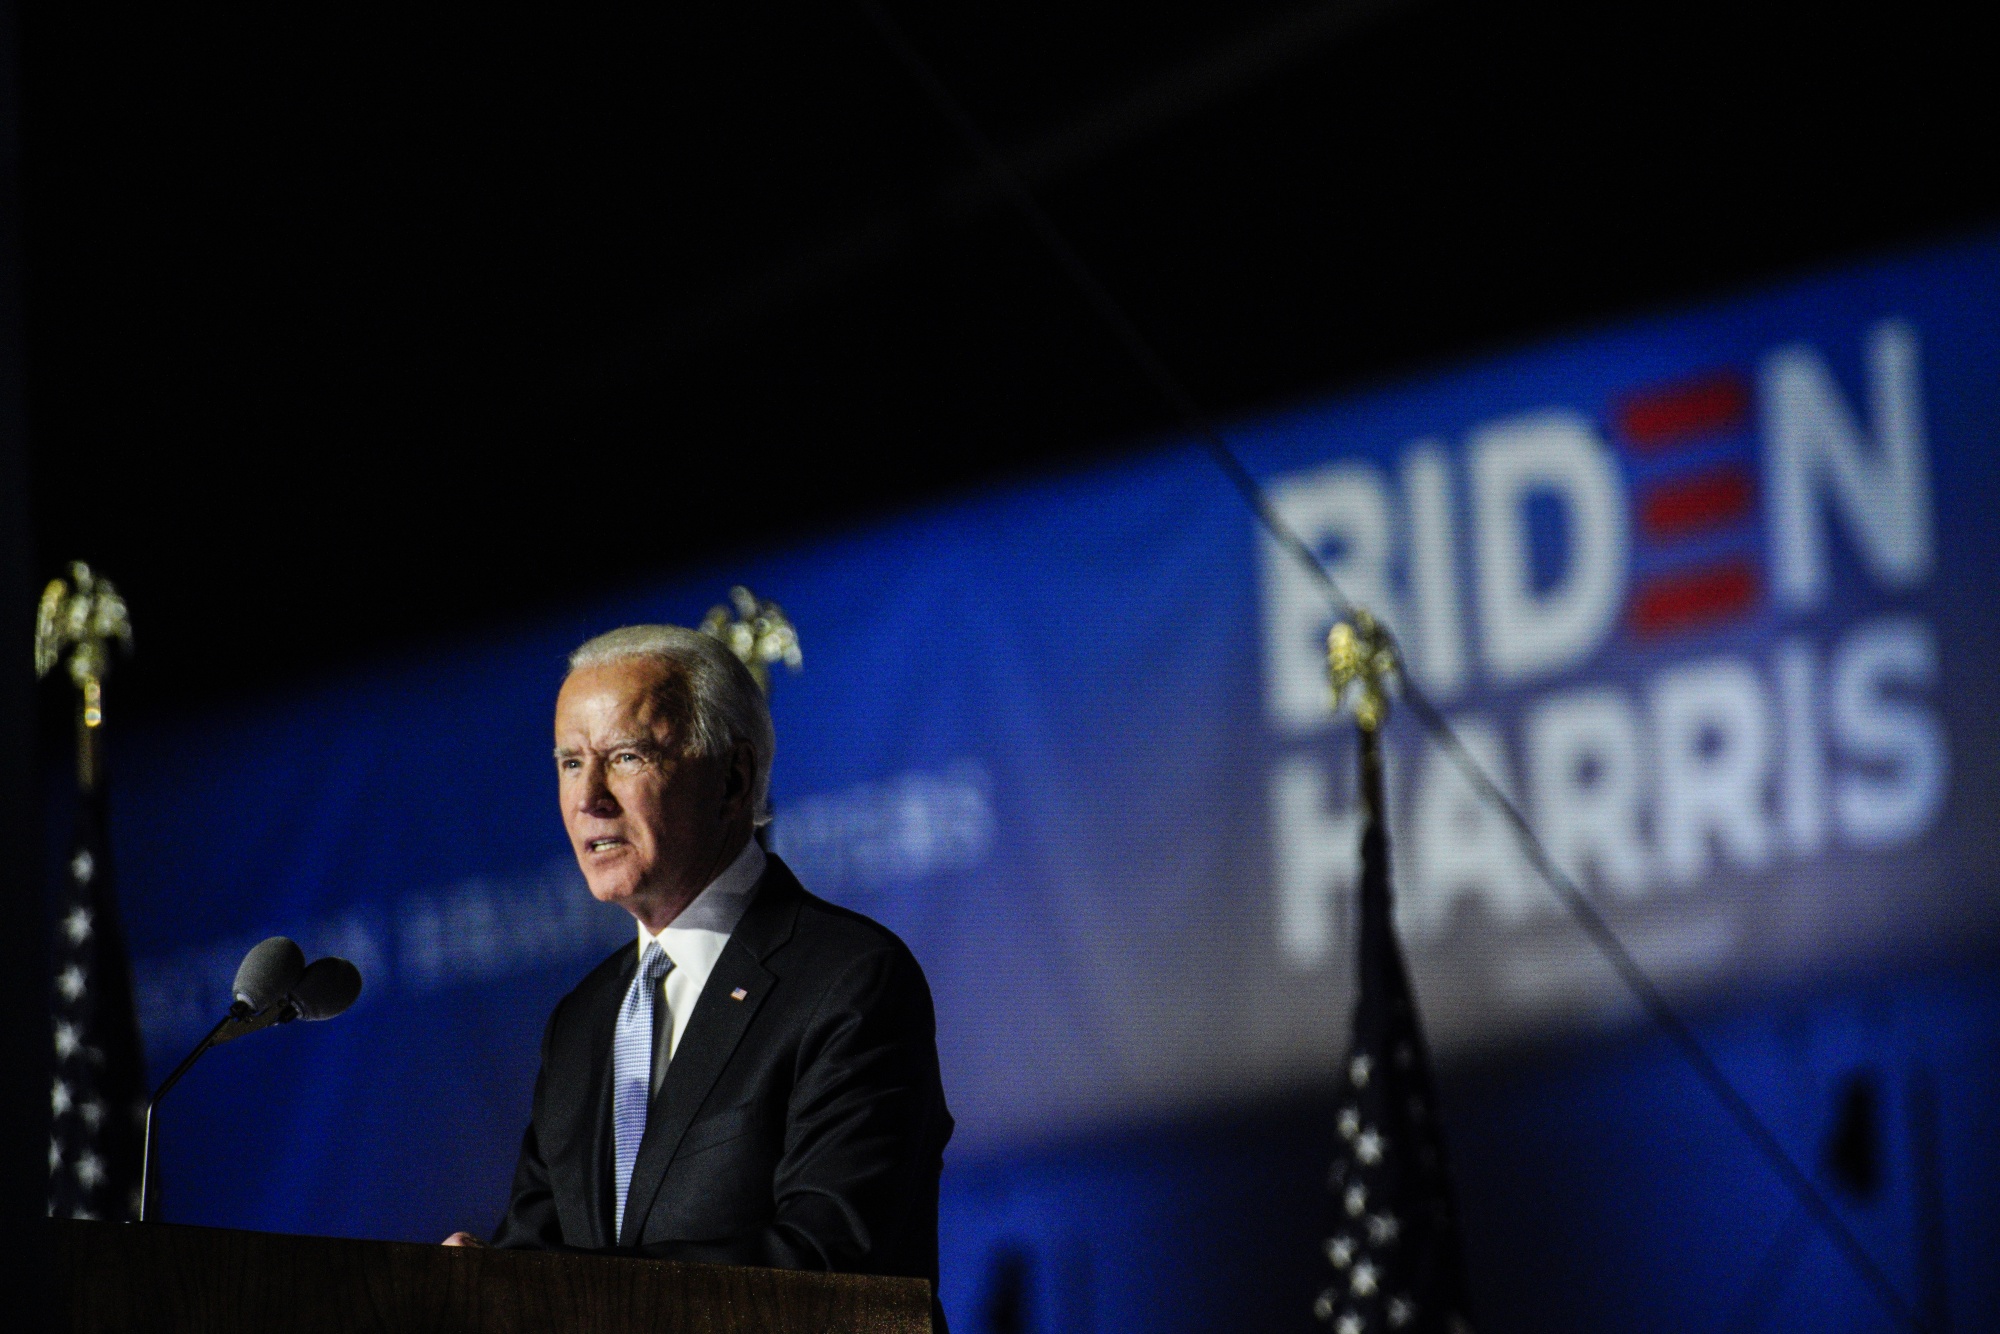 Joe Biden’s promised union members he’d be the “strongest labor president you’ve ever had.”&nbsp;